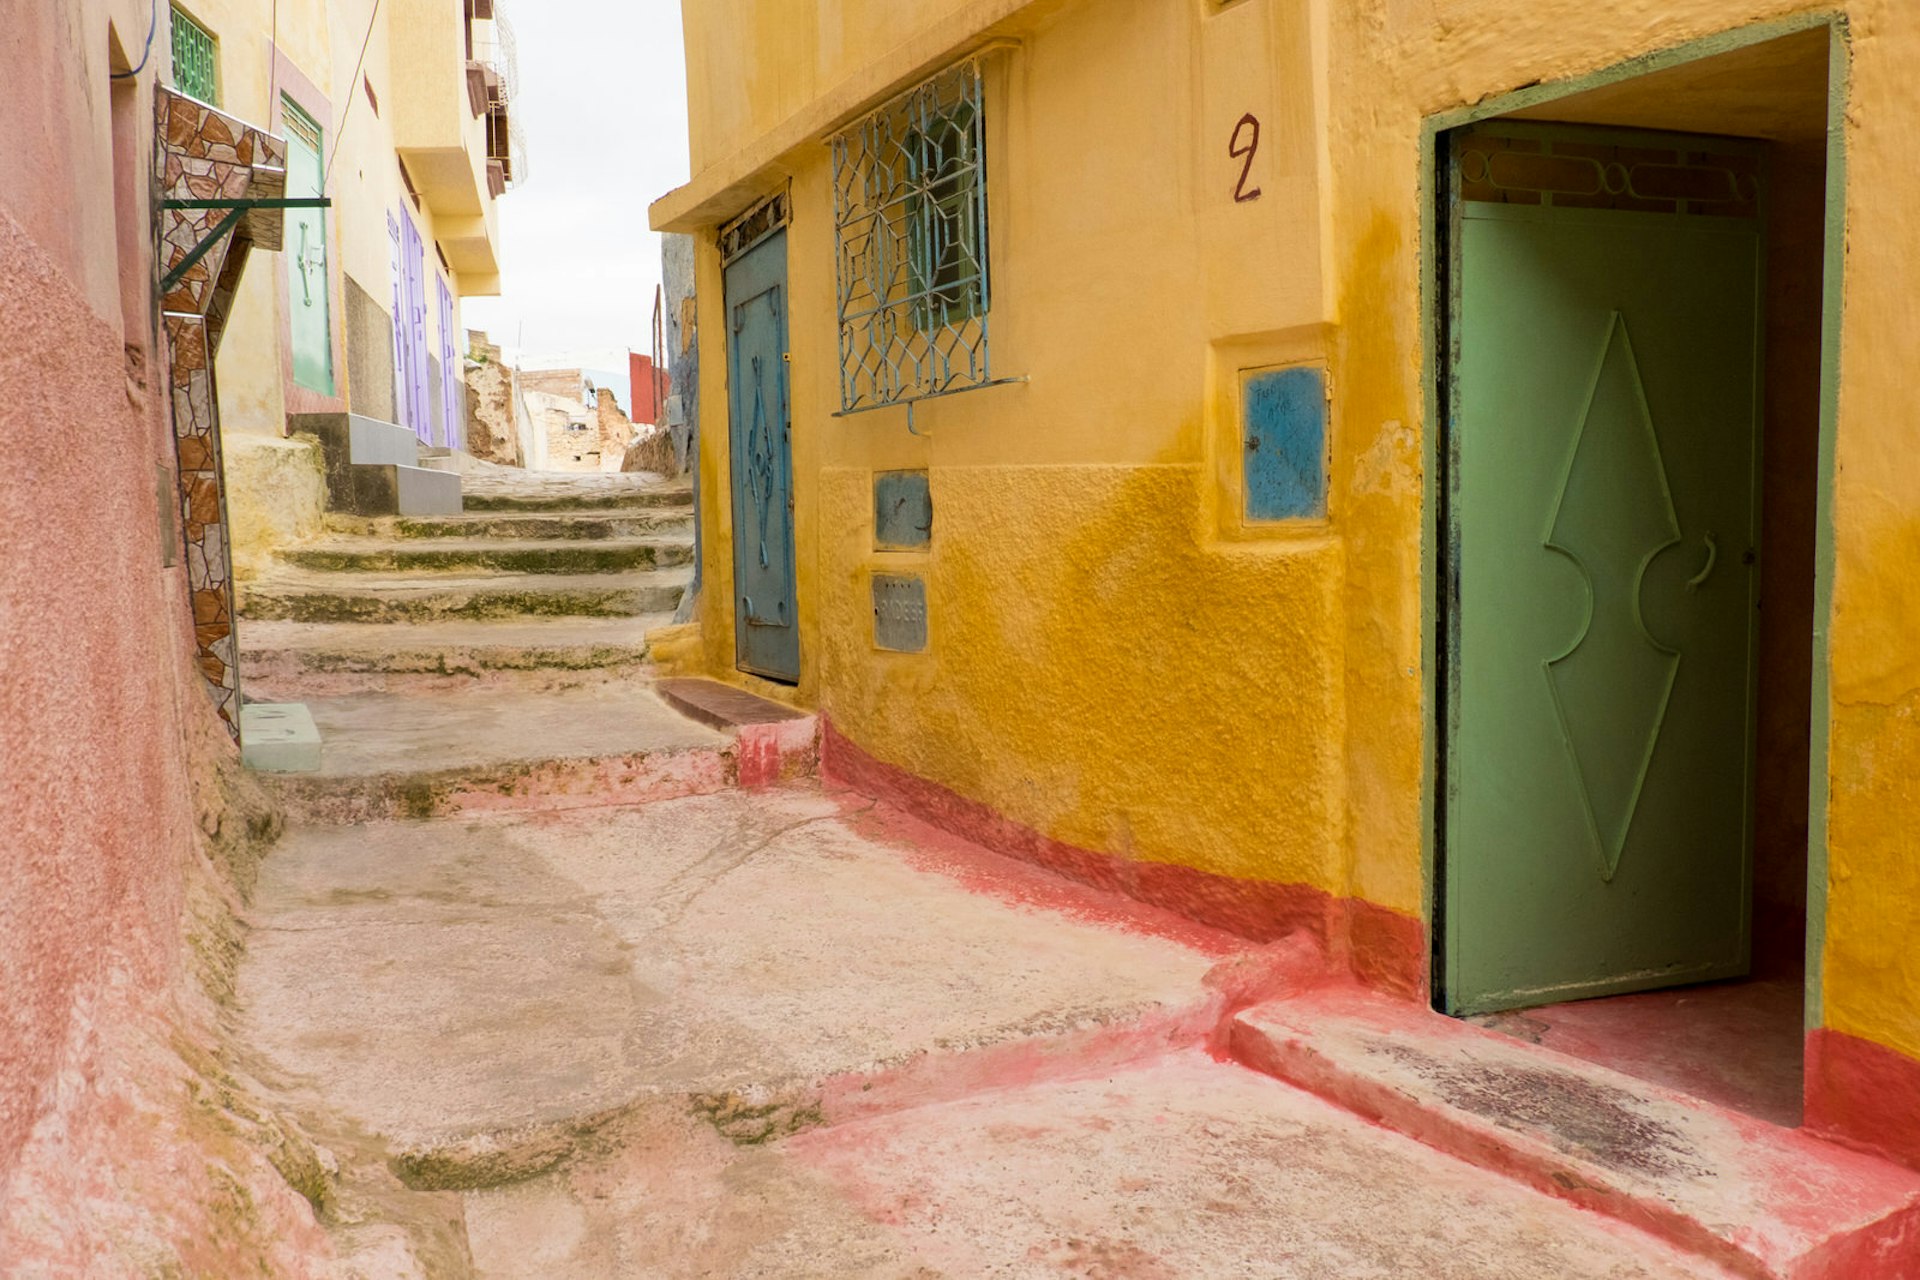 The village of Bhalil, Morocco, has pastel-coloured houses that are caves © Emily M Wilson / Getty Images